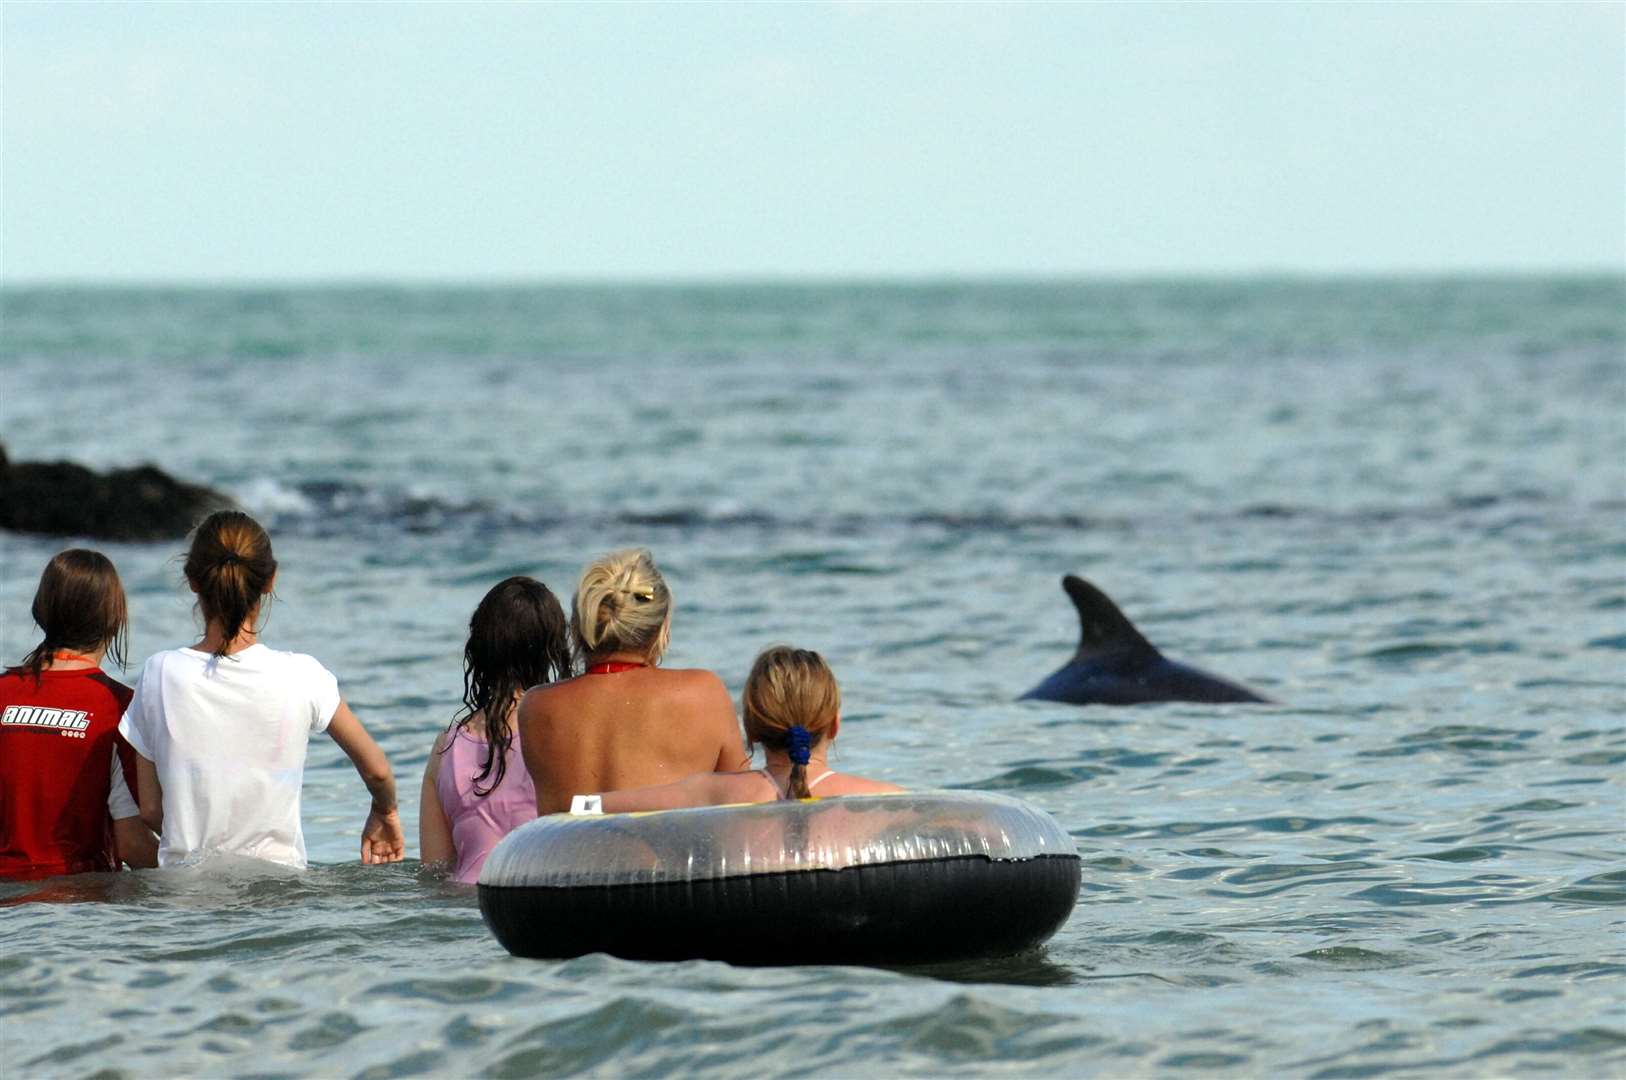 The dolphin spent several months off the Sandgate coast